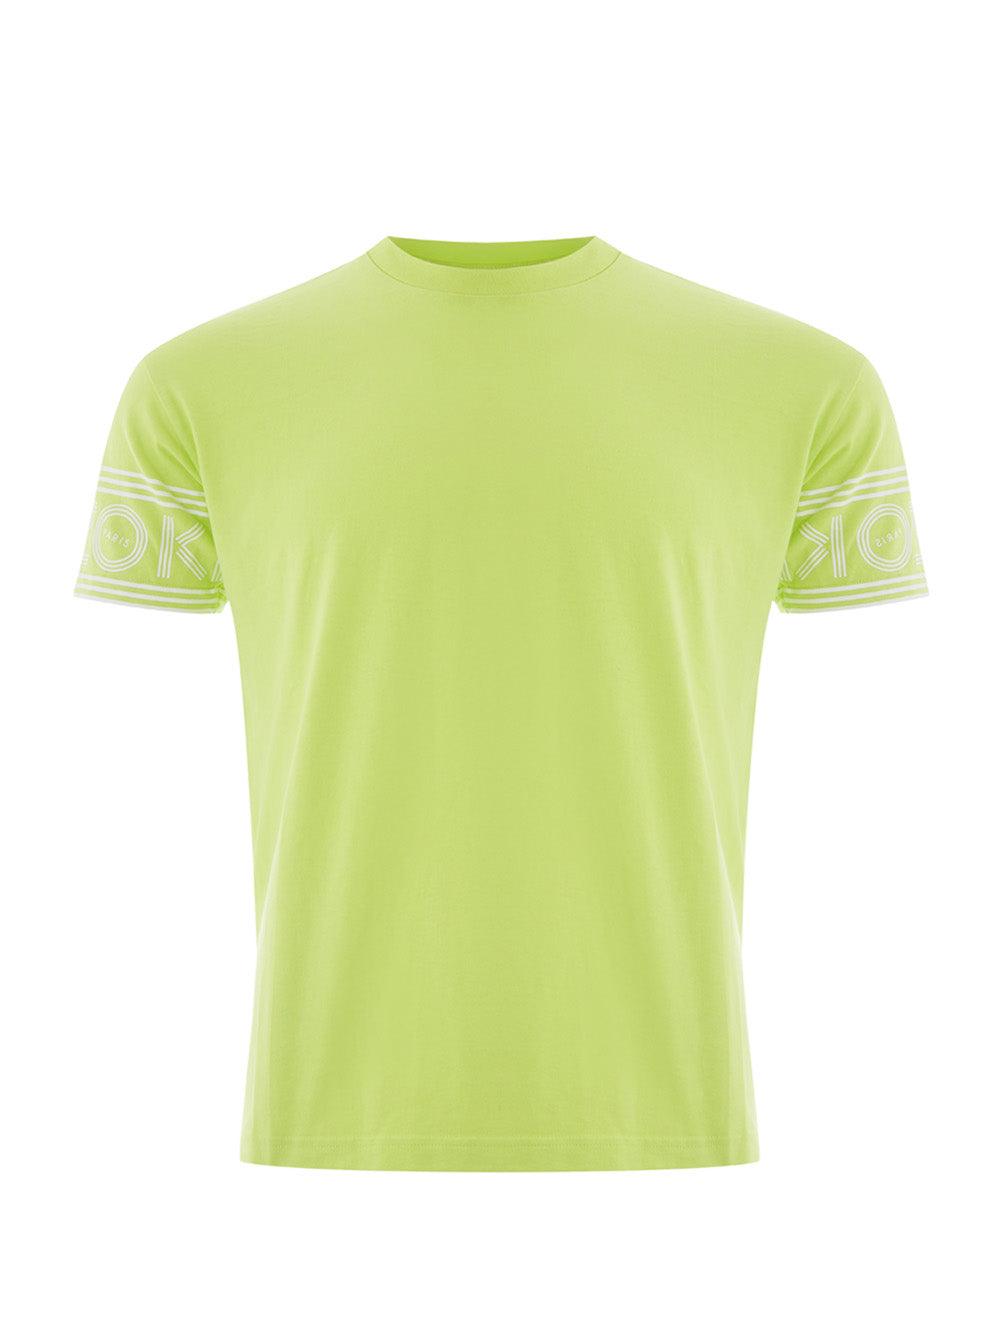 Kenzo Yellow Cotton T-Shirt with Contrasting Logo on Sleeves - Ellie Belle